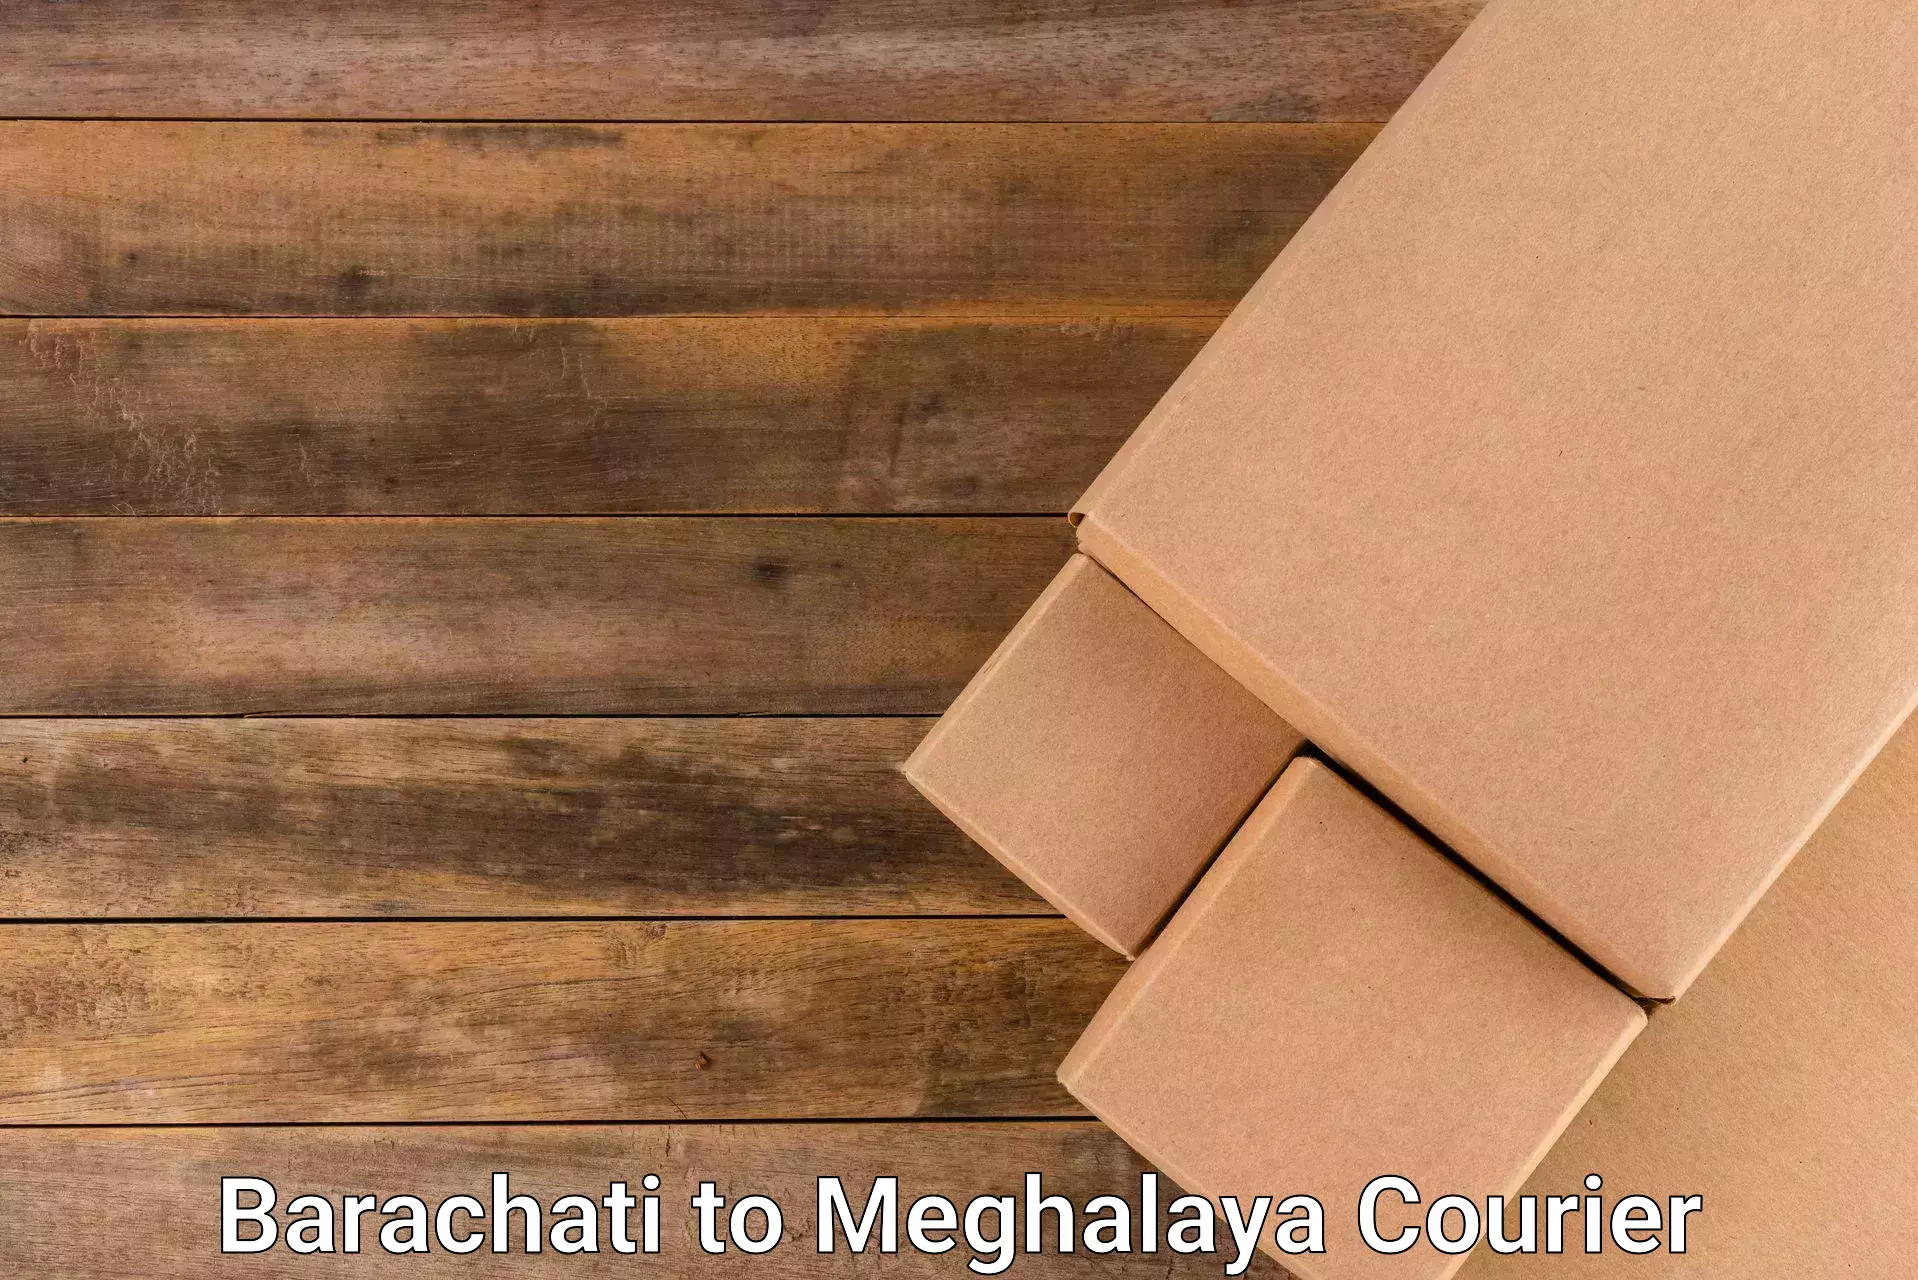 High value parcel delivery in Barachati to Tura